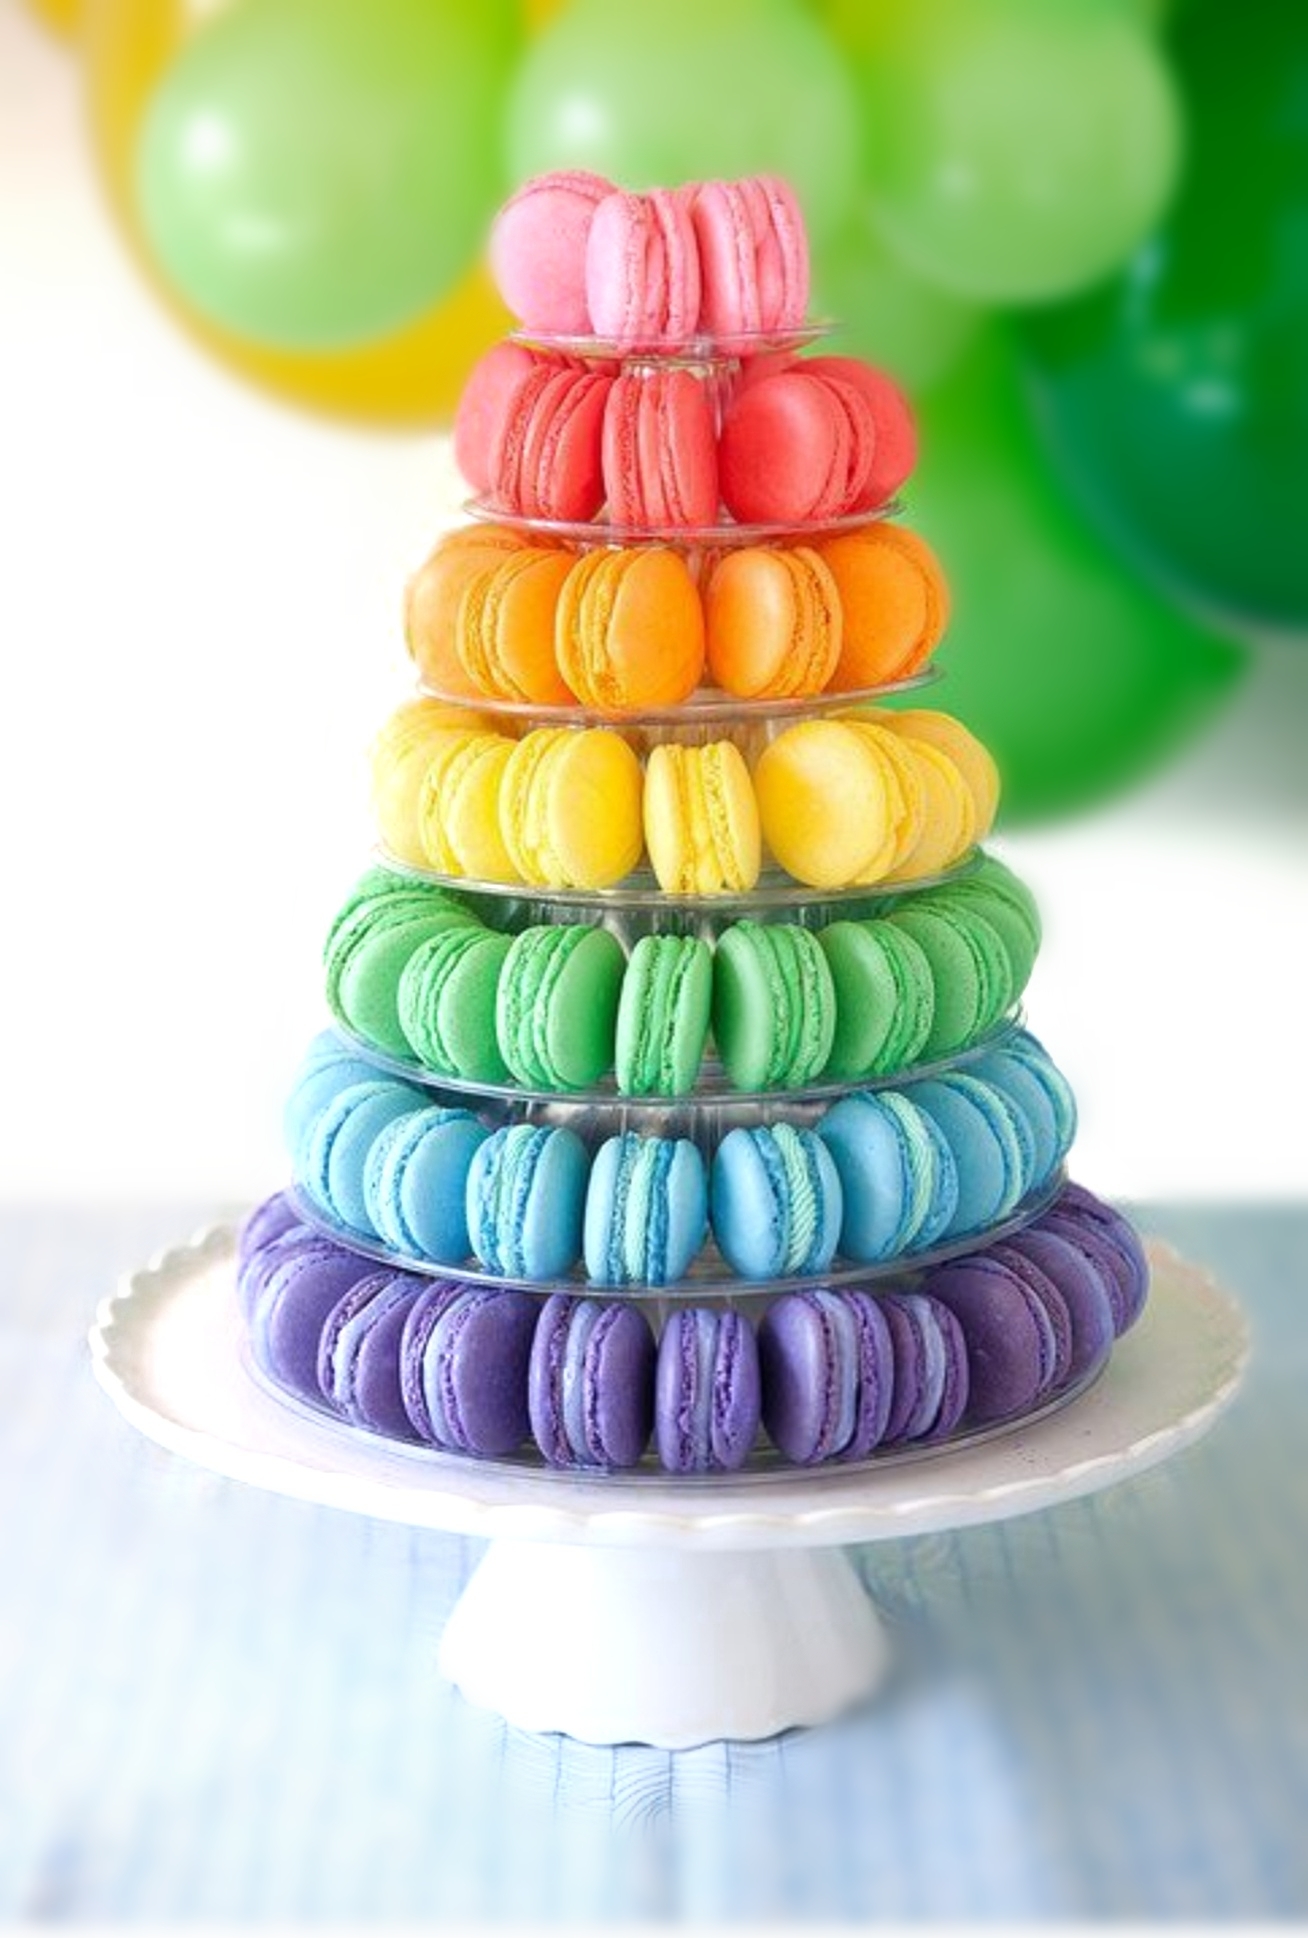 Leila Love French Macaron Towers & More - Catering & Events